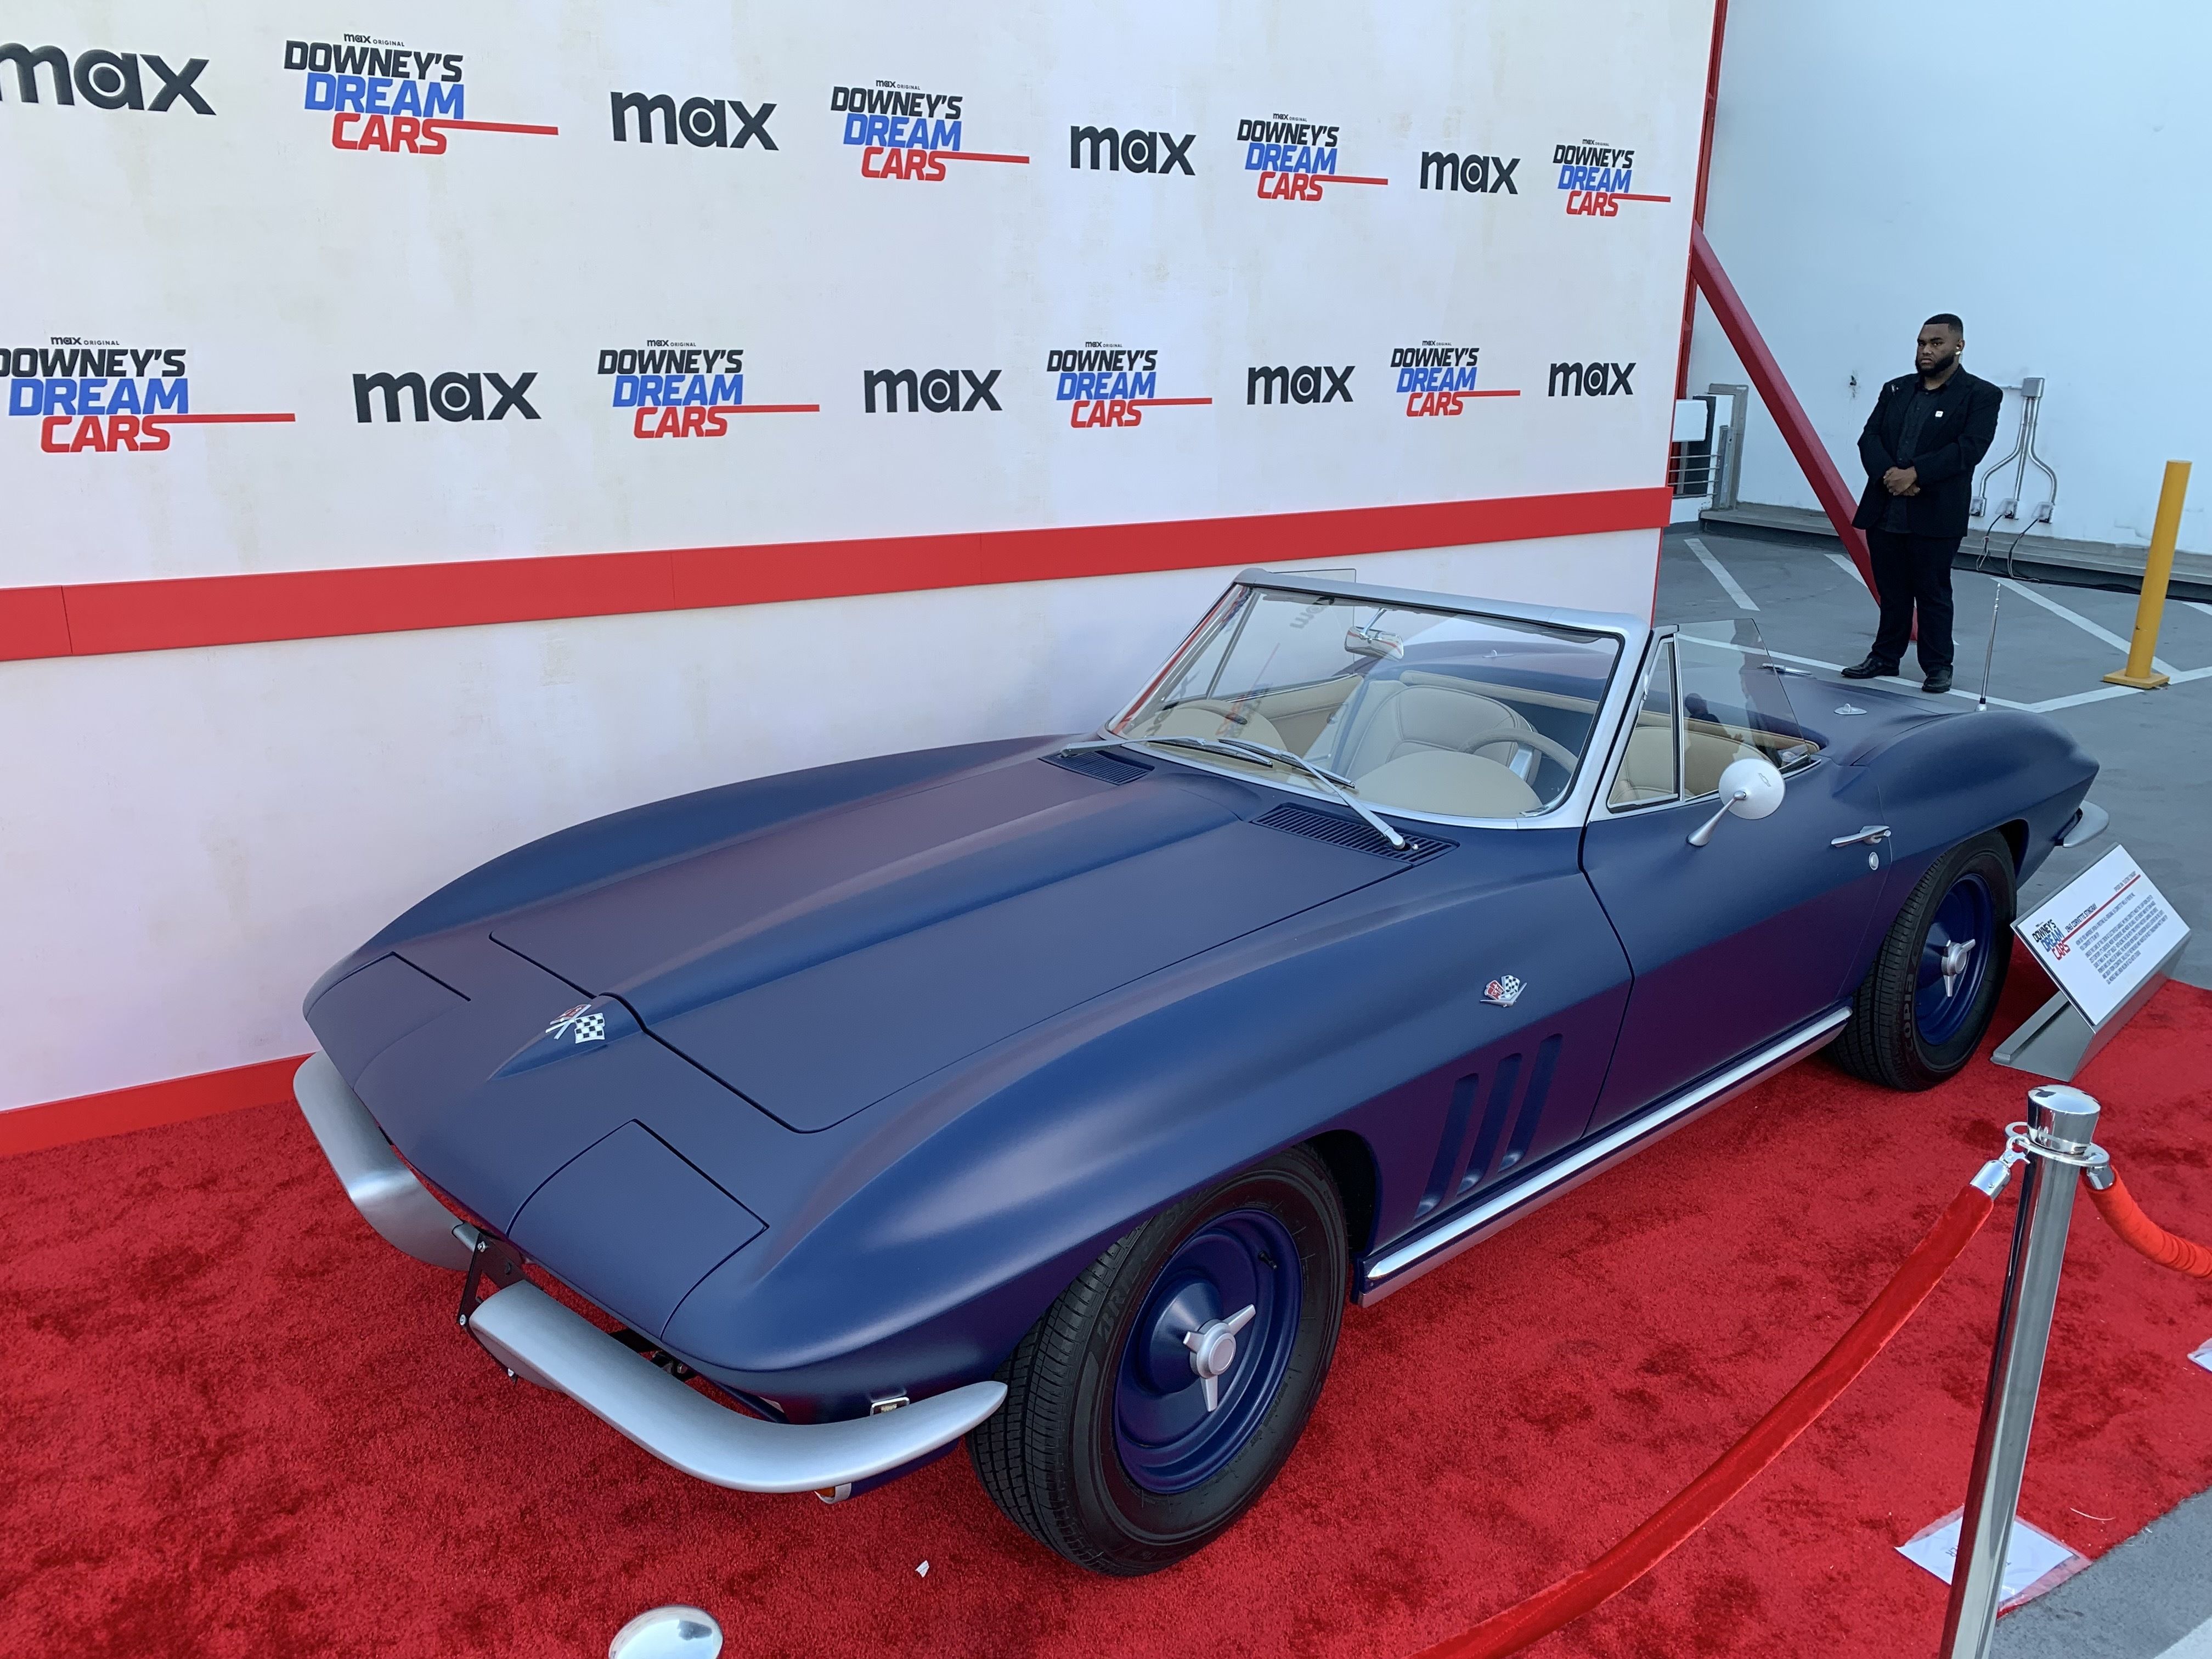 Robert Downey Jr. has new Max show on car collection